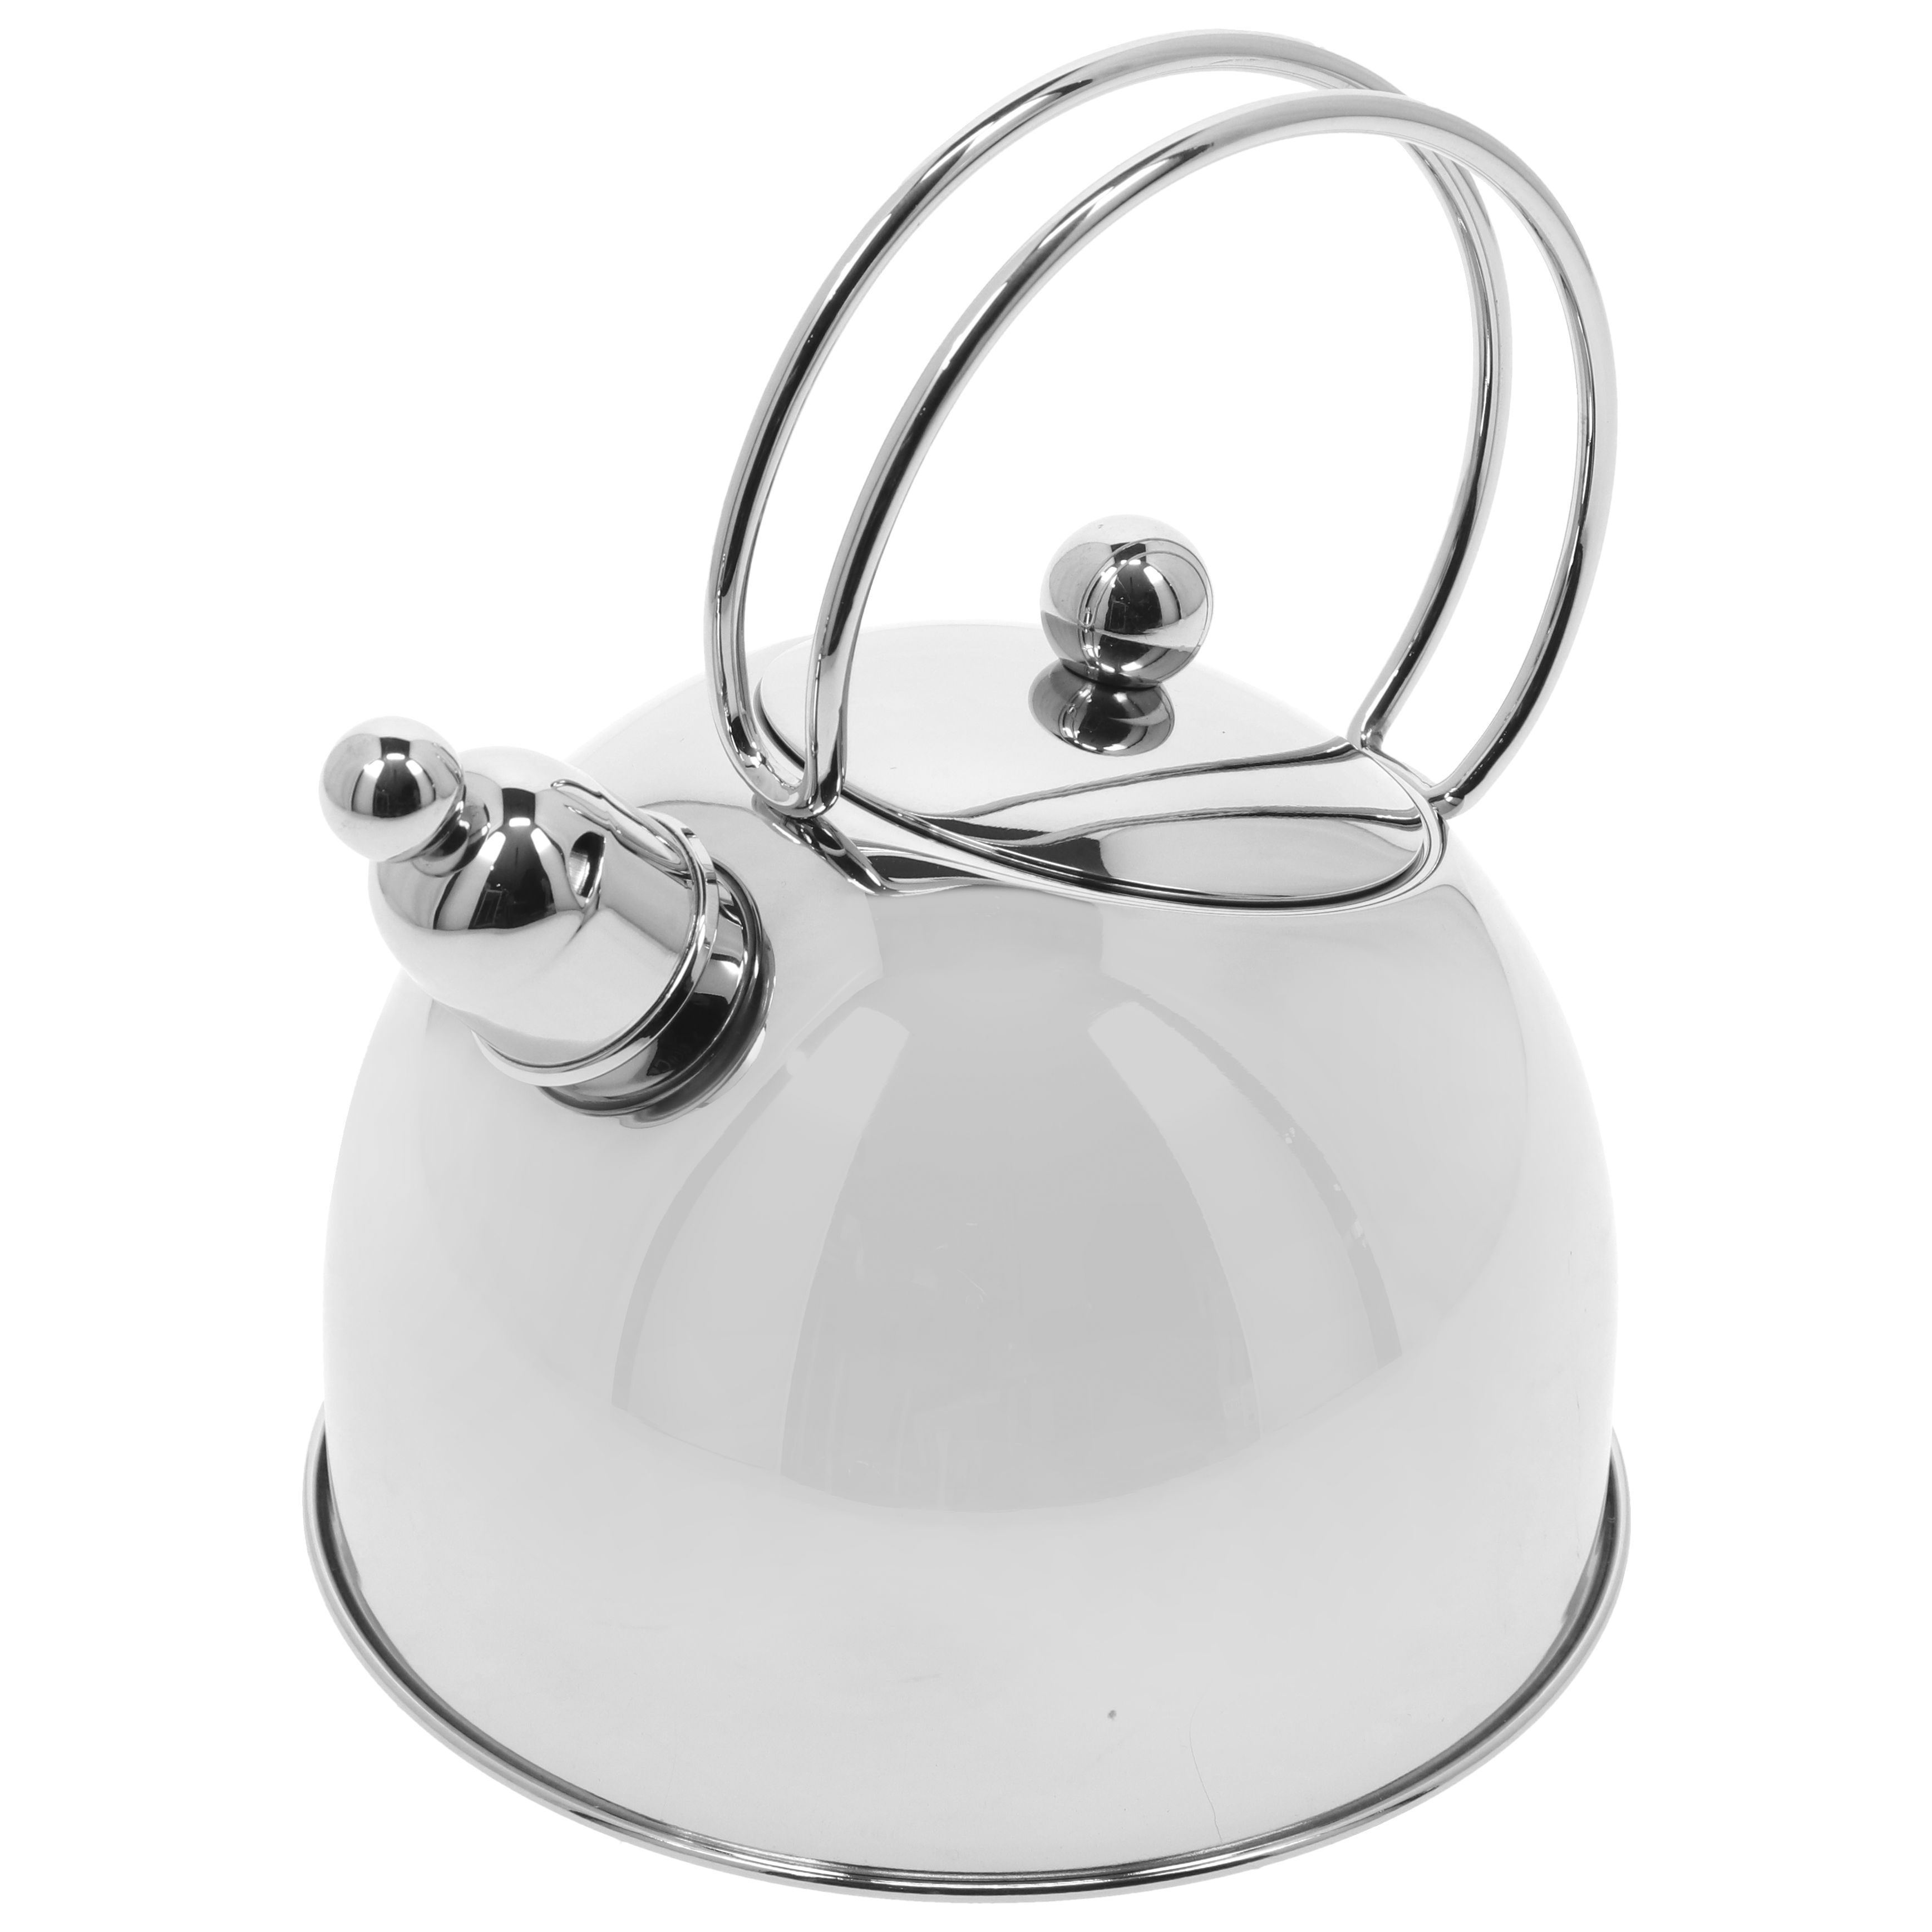 Cook Pro 3 Quarts Stainless Steel (18/8) Whistling Stovetop Tea Kettle